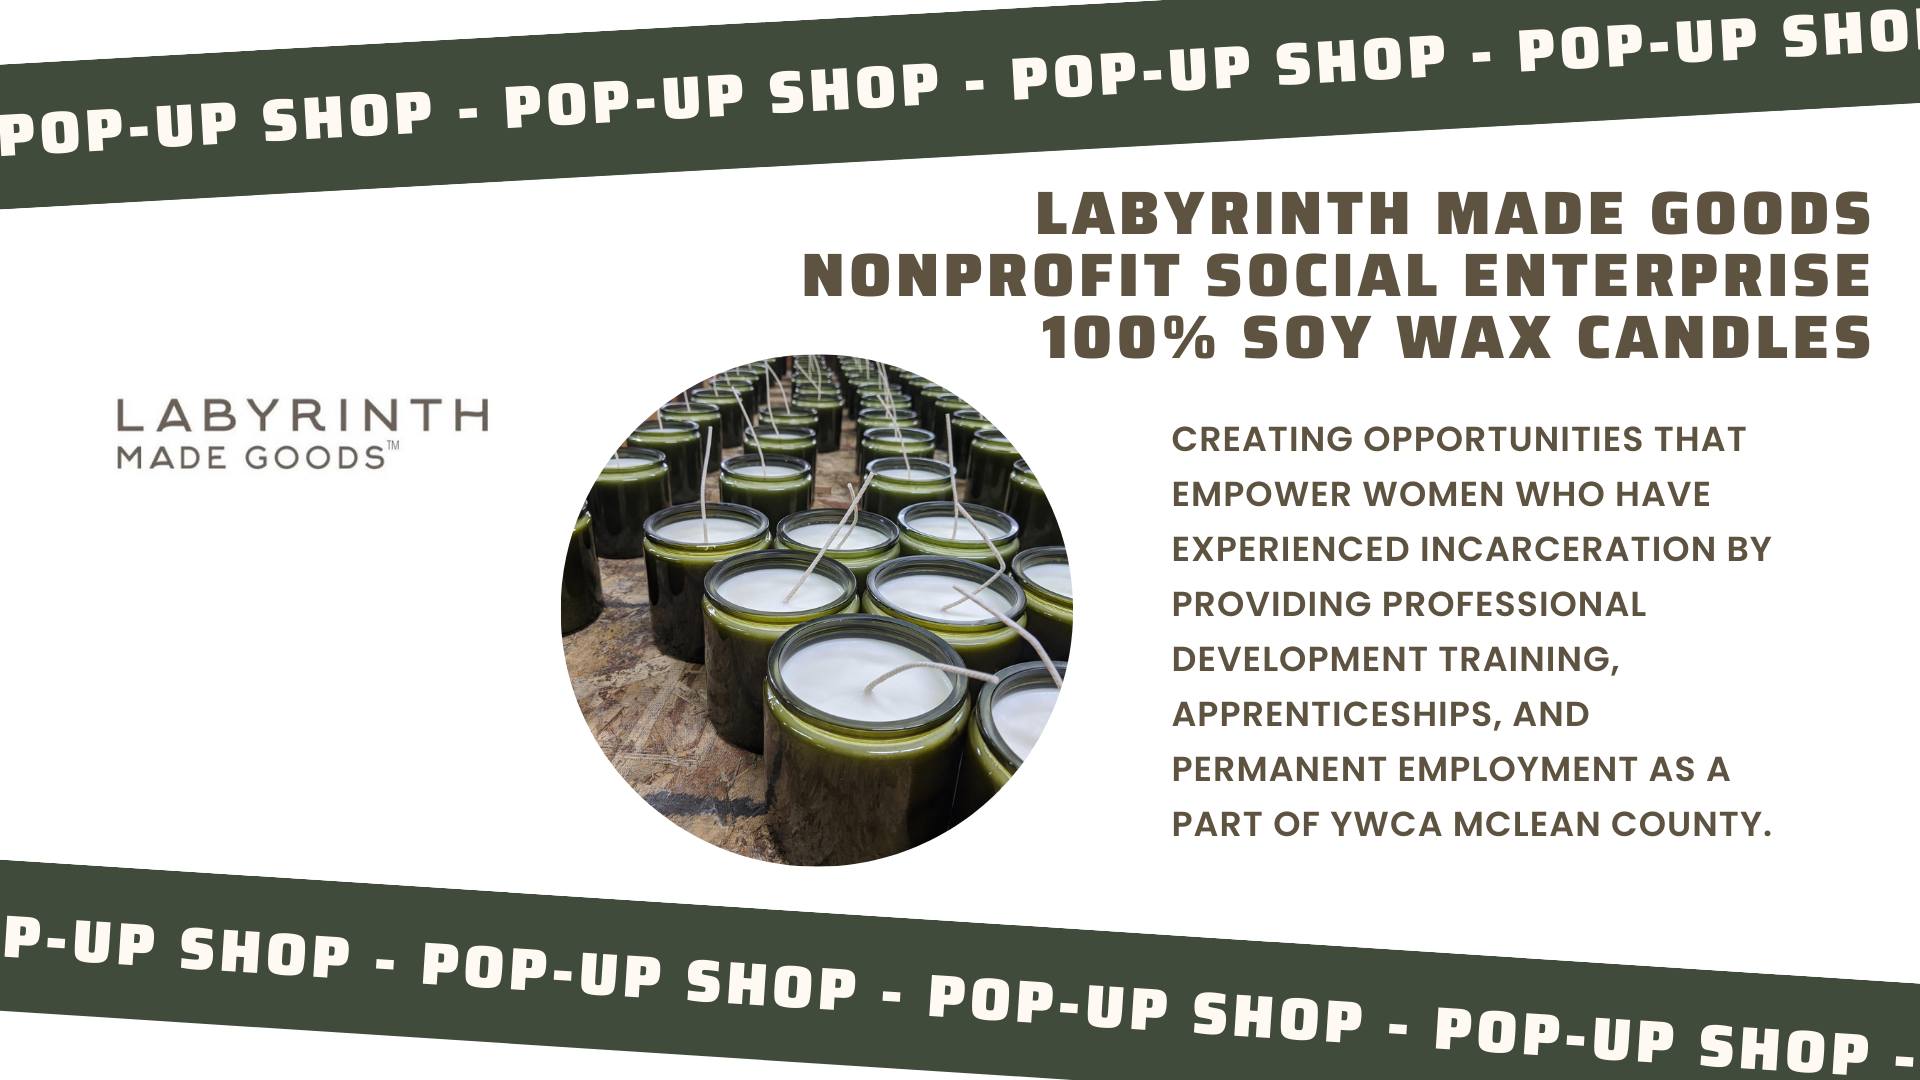 Saturday Pop-Up Shop with Labyrinth Made Goods at Bobzbay Books